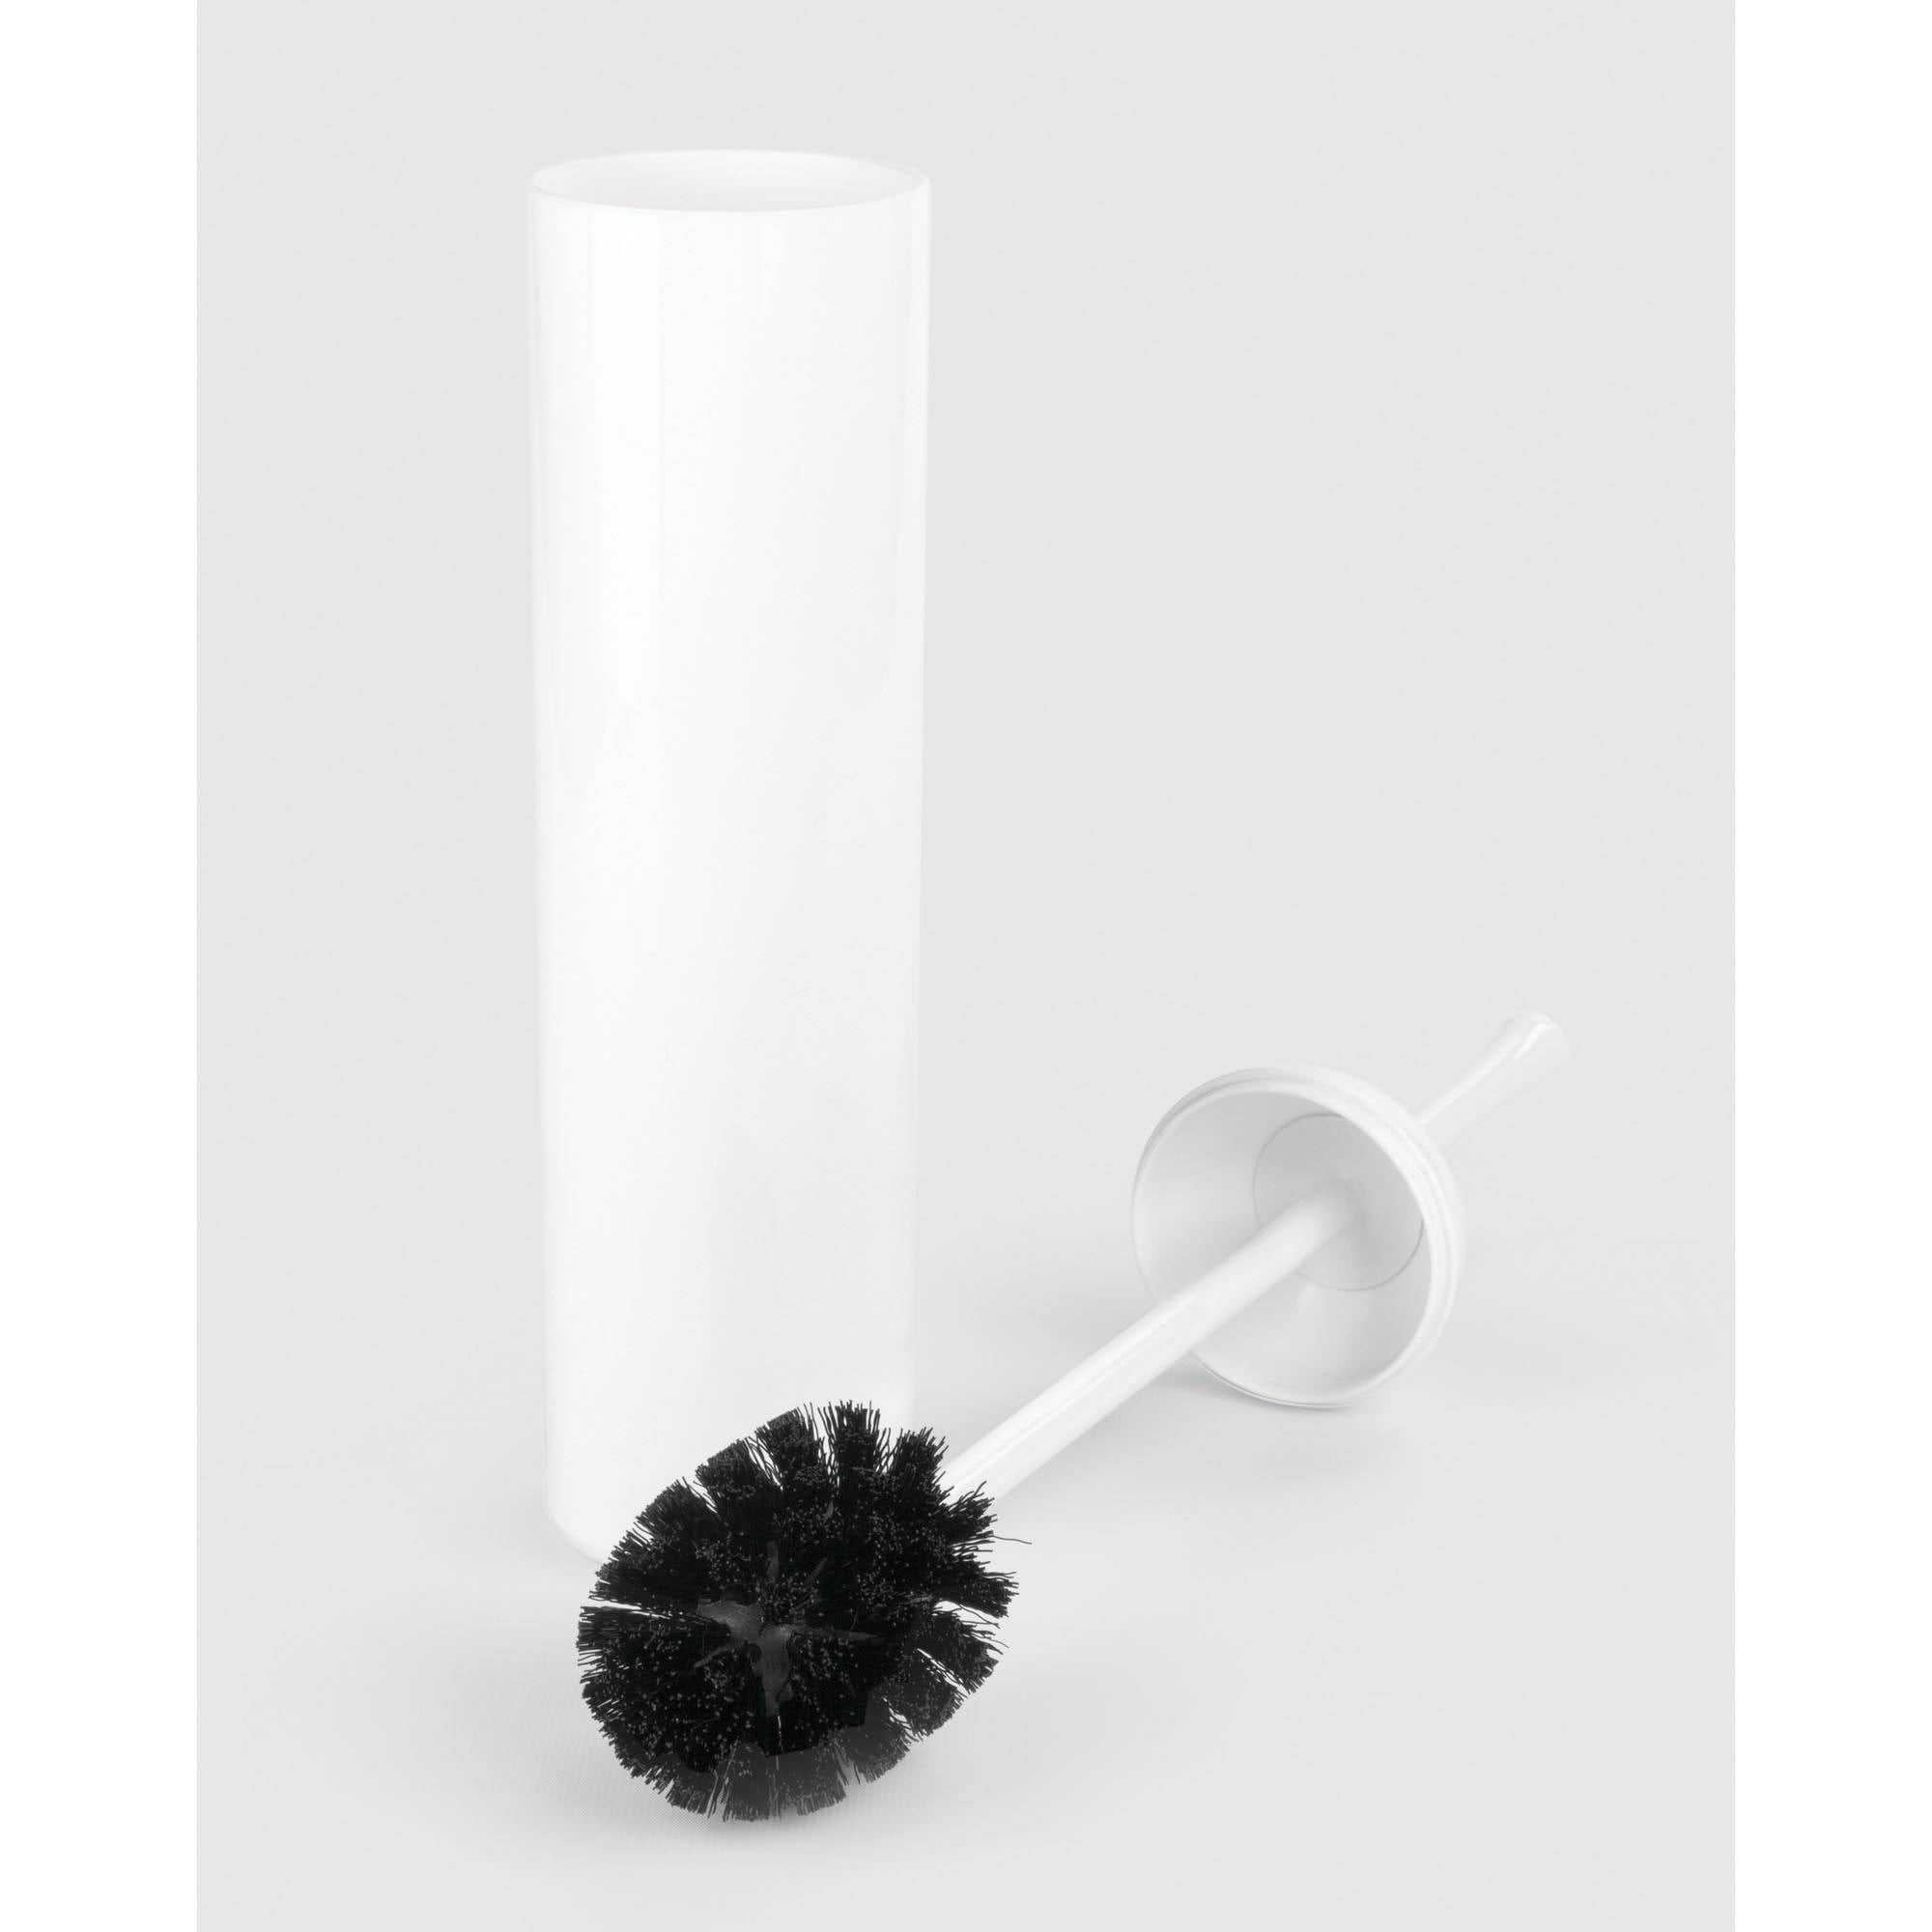 CRAVE Silicone Toilet Brushes /& Holder Set with Toilet Storage Compartment Black